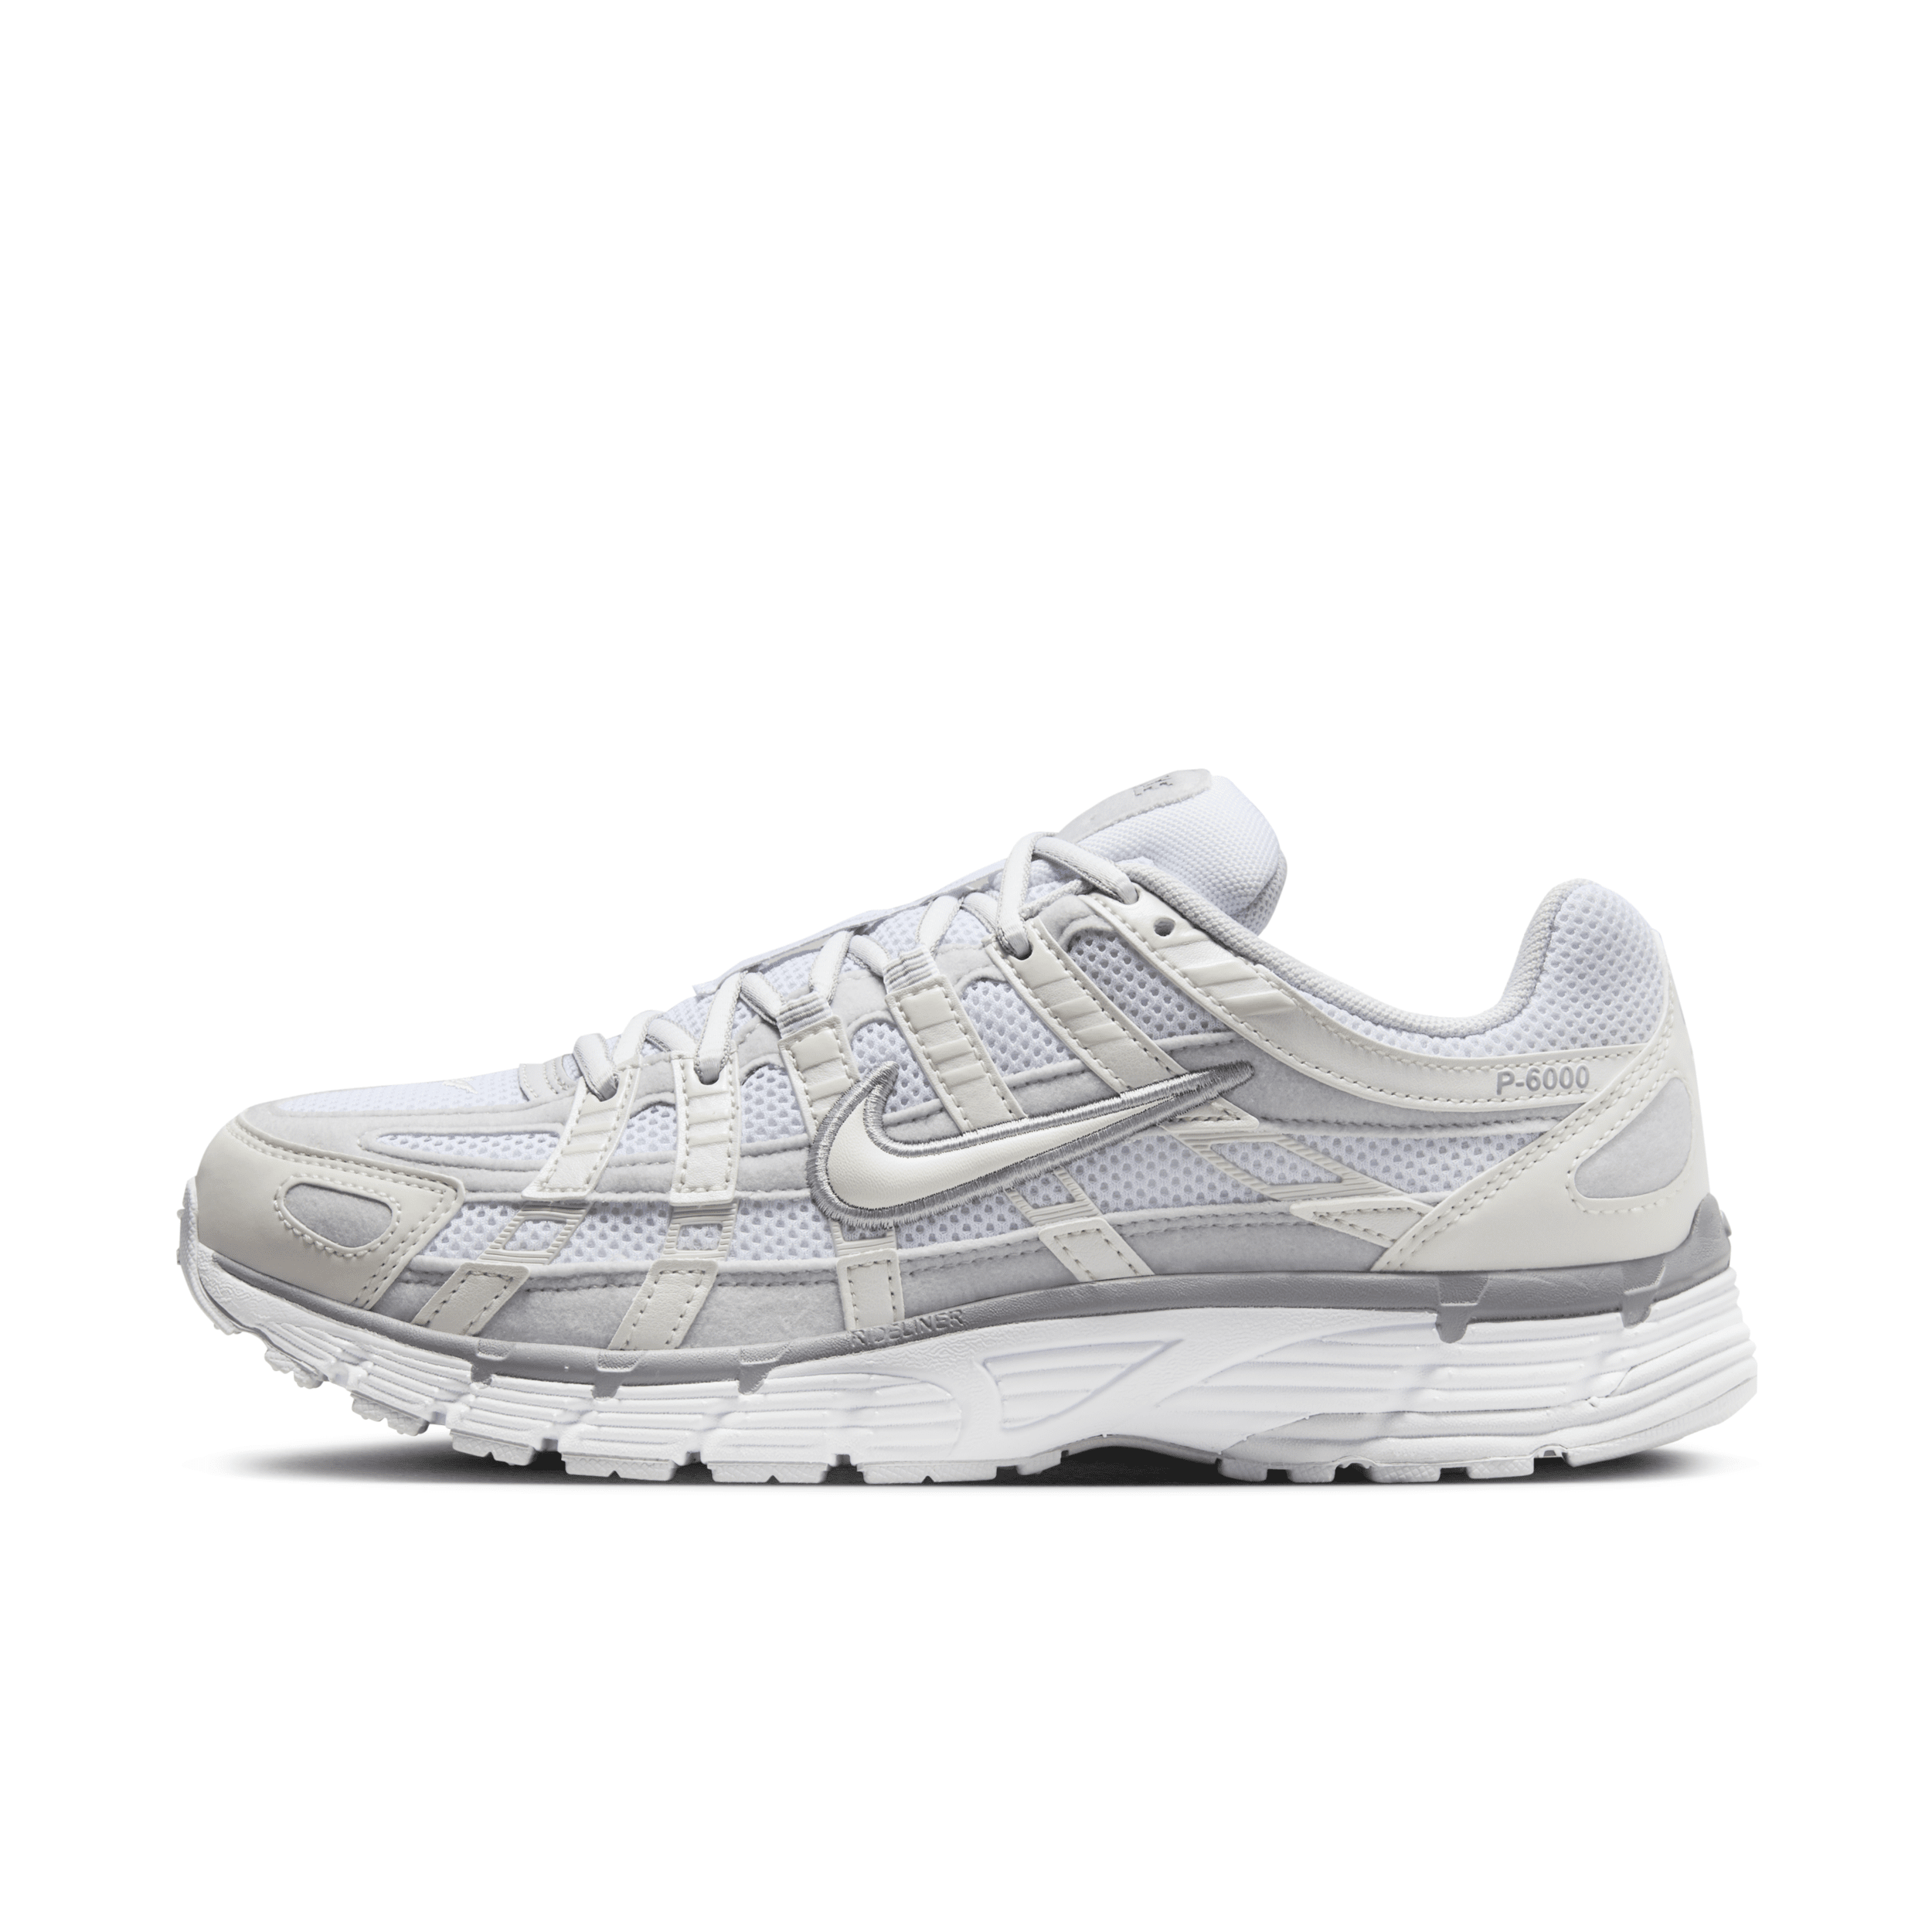 Nike Women's P-6000 Shoes in White, Size: 6.5 | FV6603-101